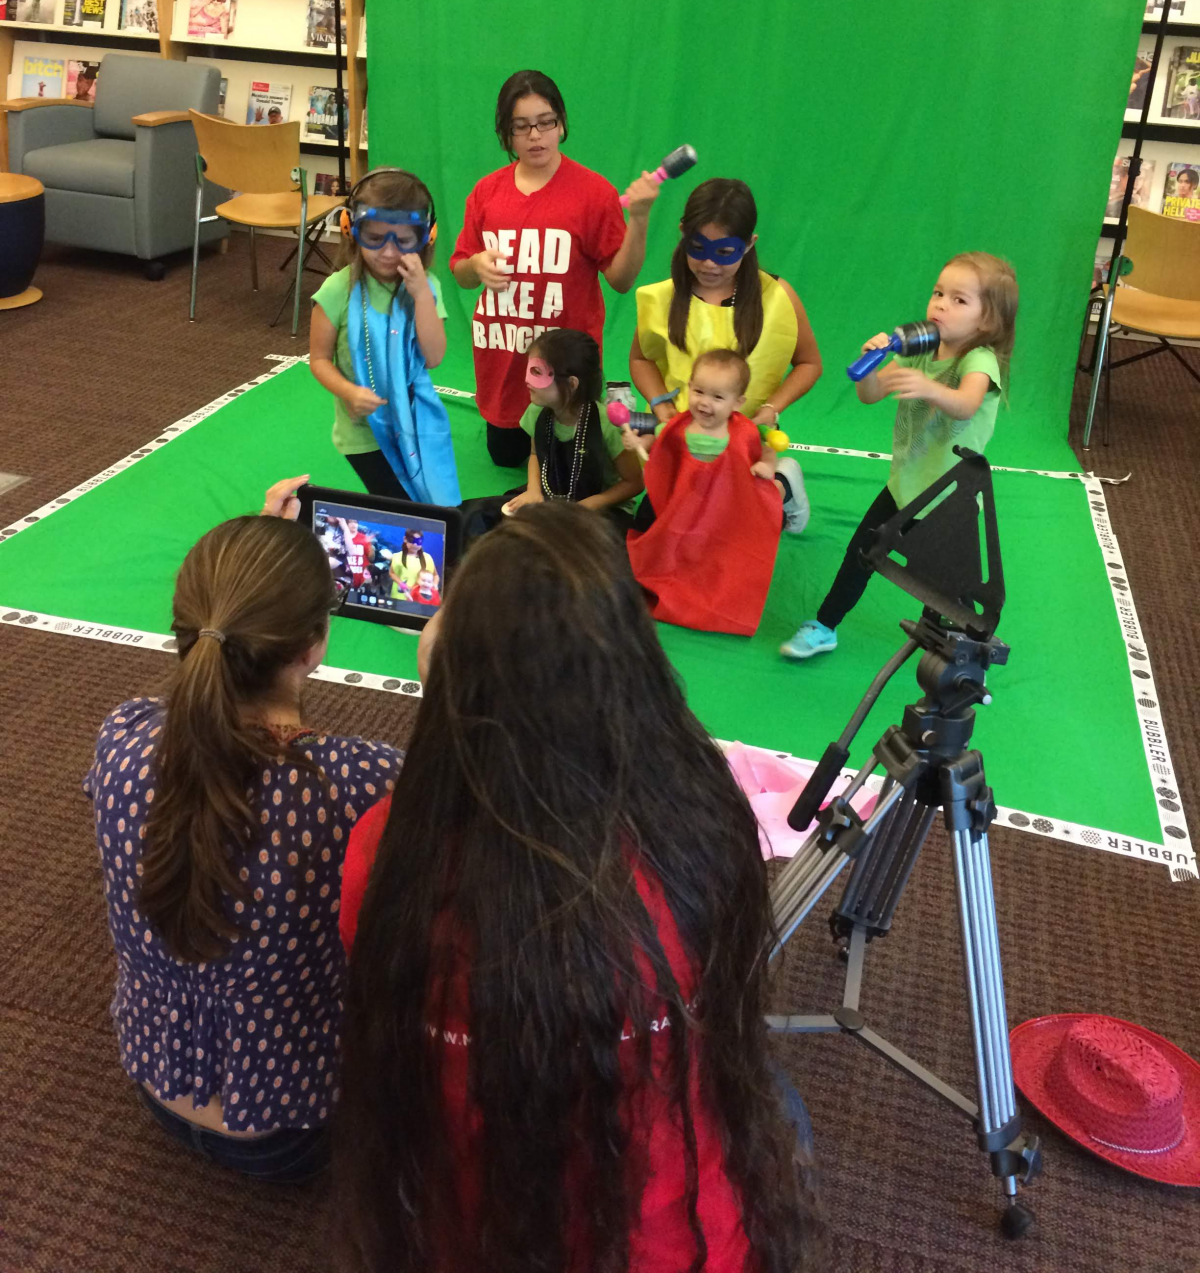 group of kids recording a music video at the library in front of a green screen